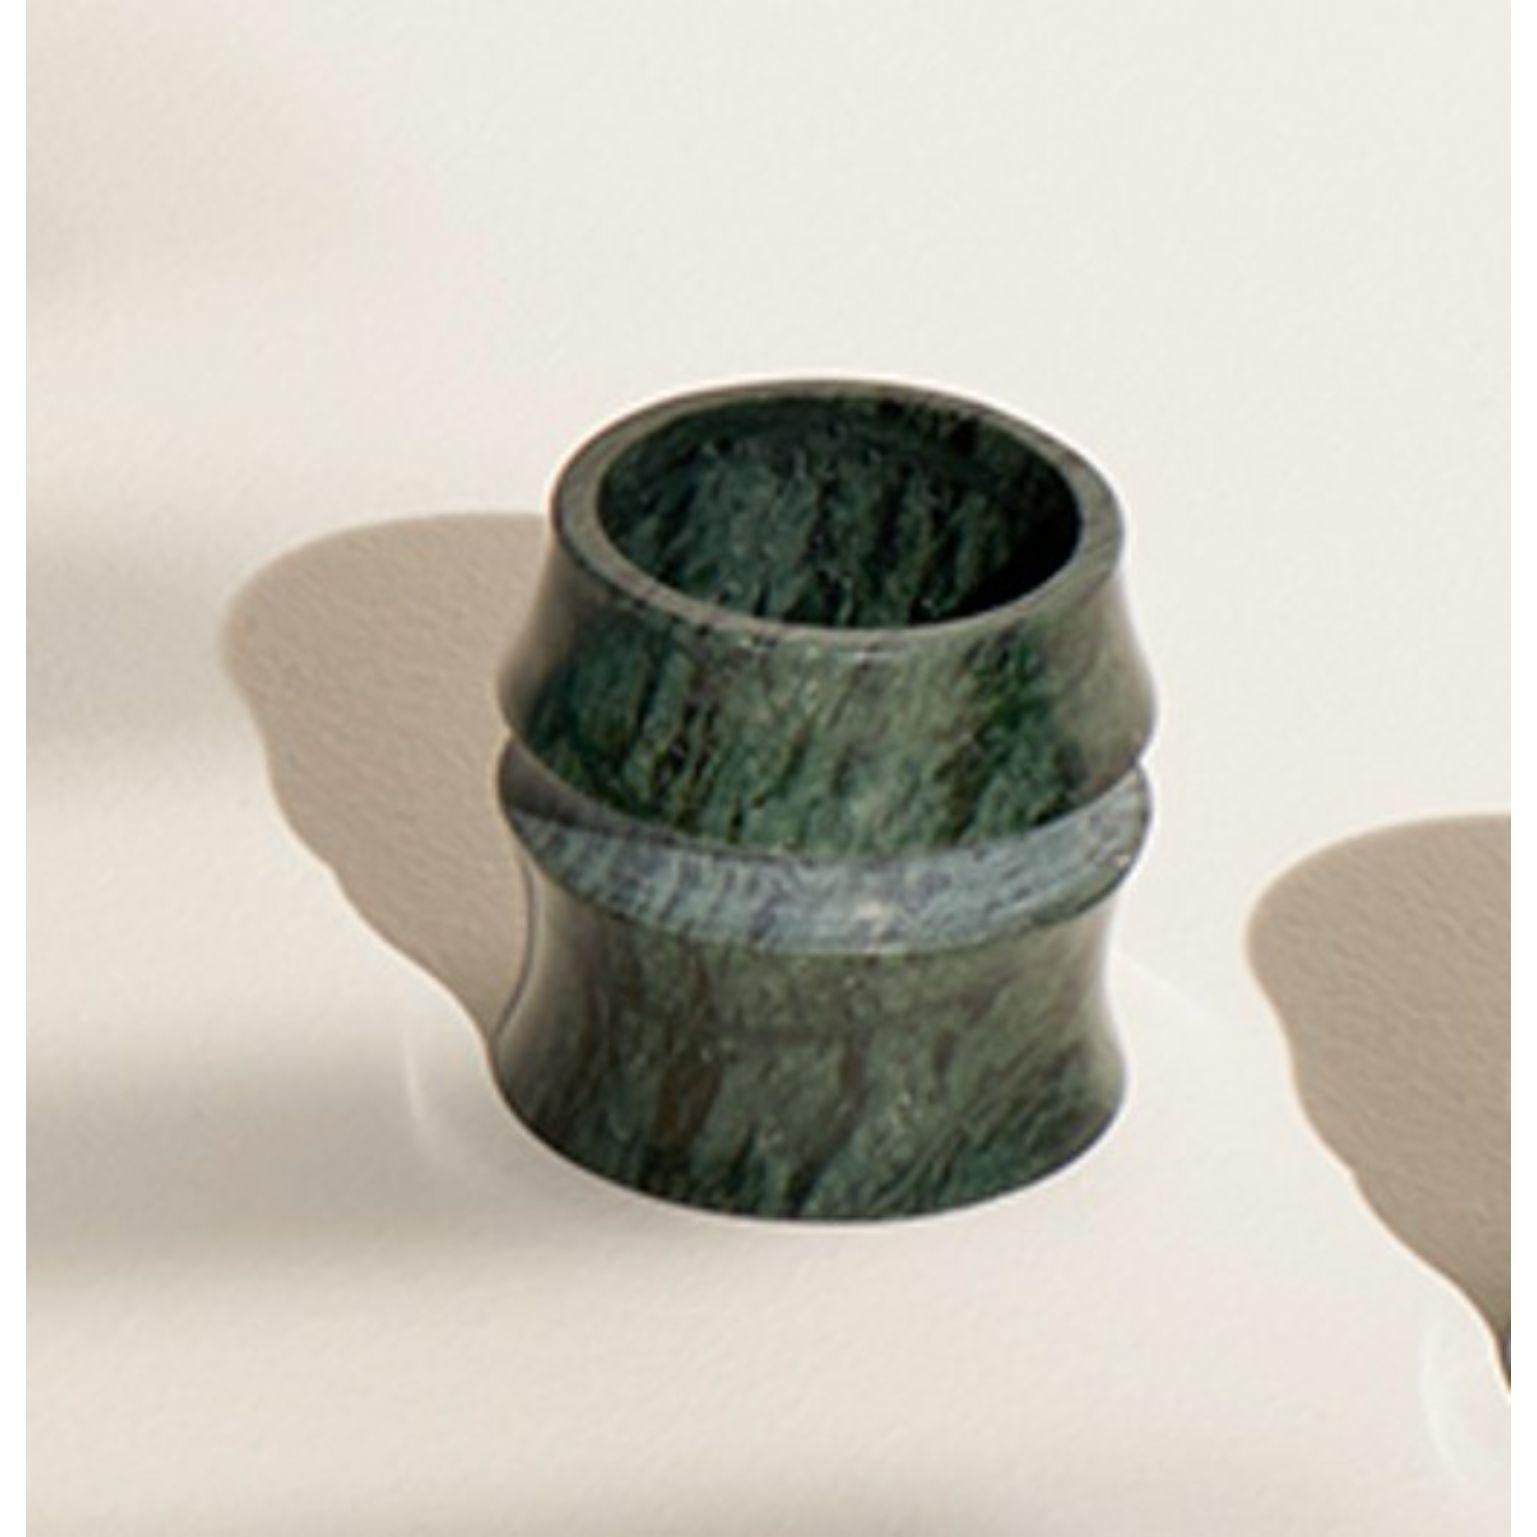 Kadomatsu Cup by Michele Chiossi
Jap Vegetation Collection
Dimensions: 5.5 x 6 cm
Materials: Verde Guatemala

A zigzag line defines the illusory border between art and design. Chiossi crosses it entirely by creating a collection of vases,